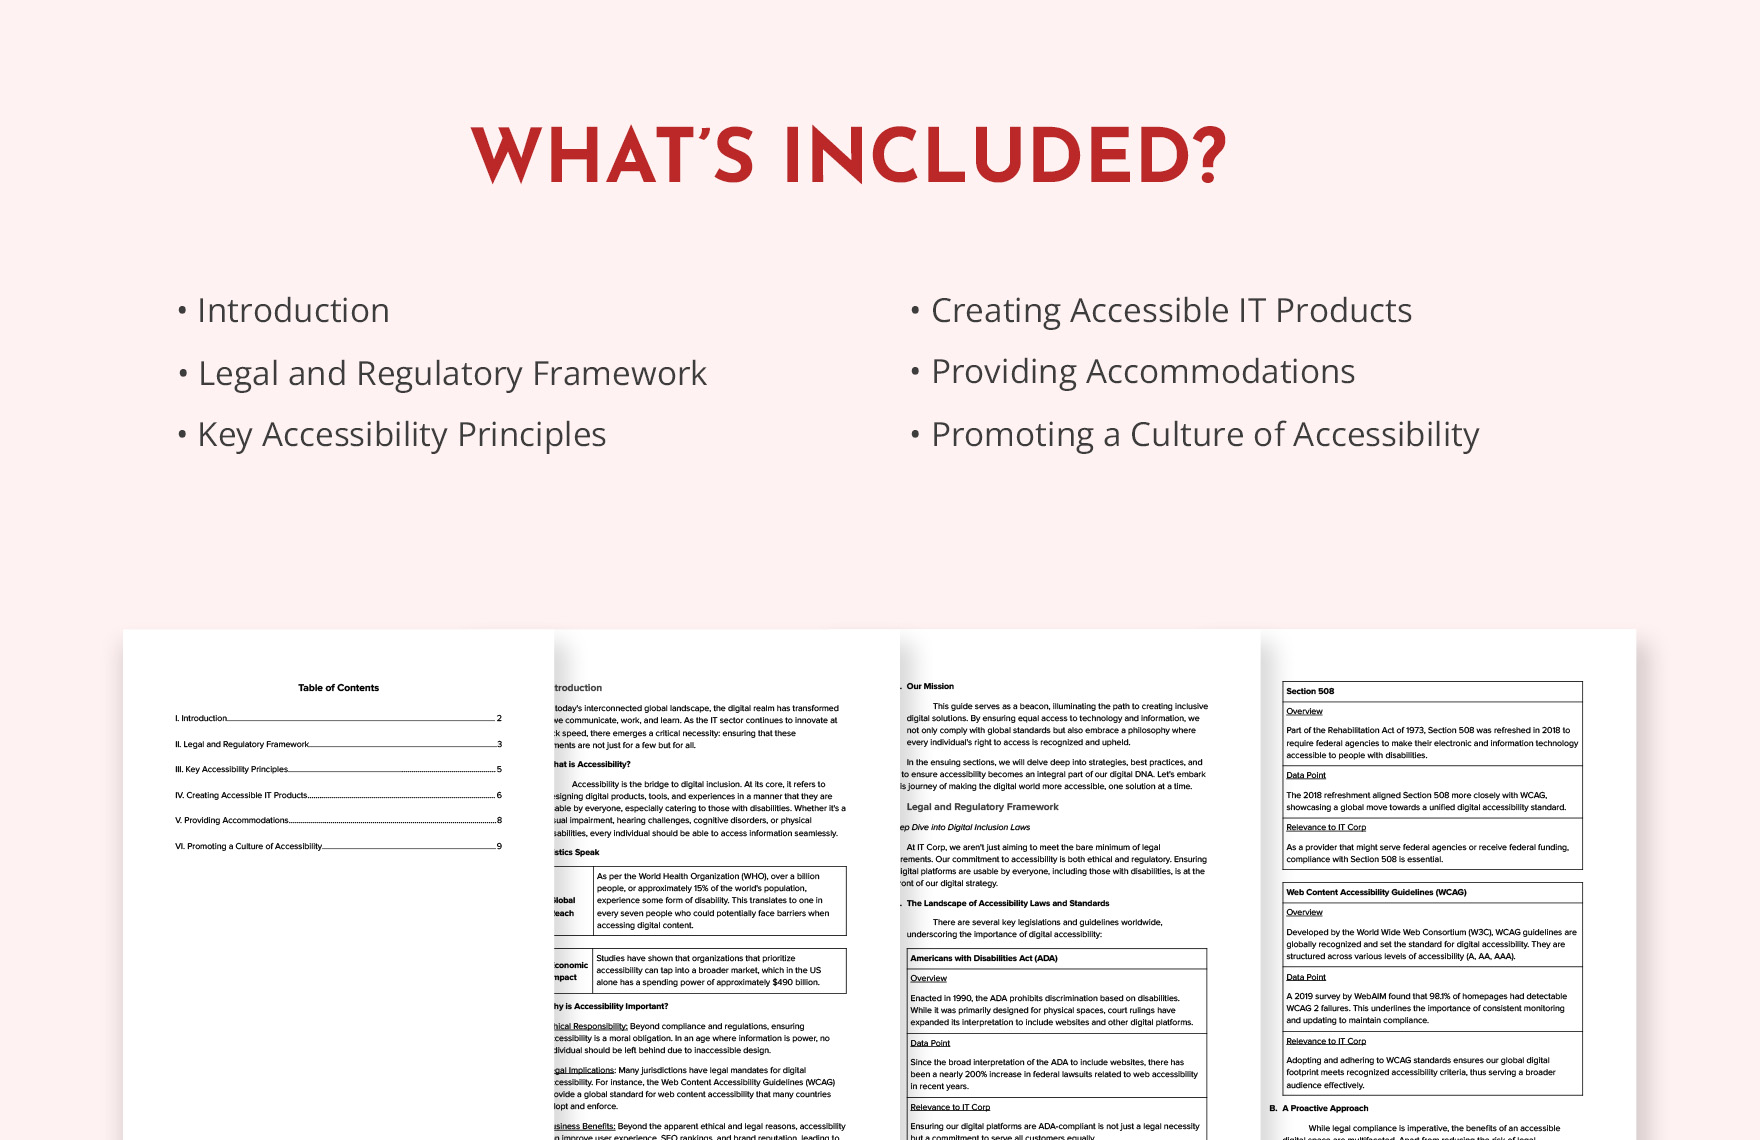 IT Accessibility and Accommodation Guide Template